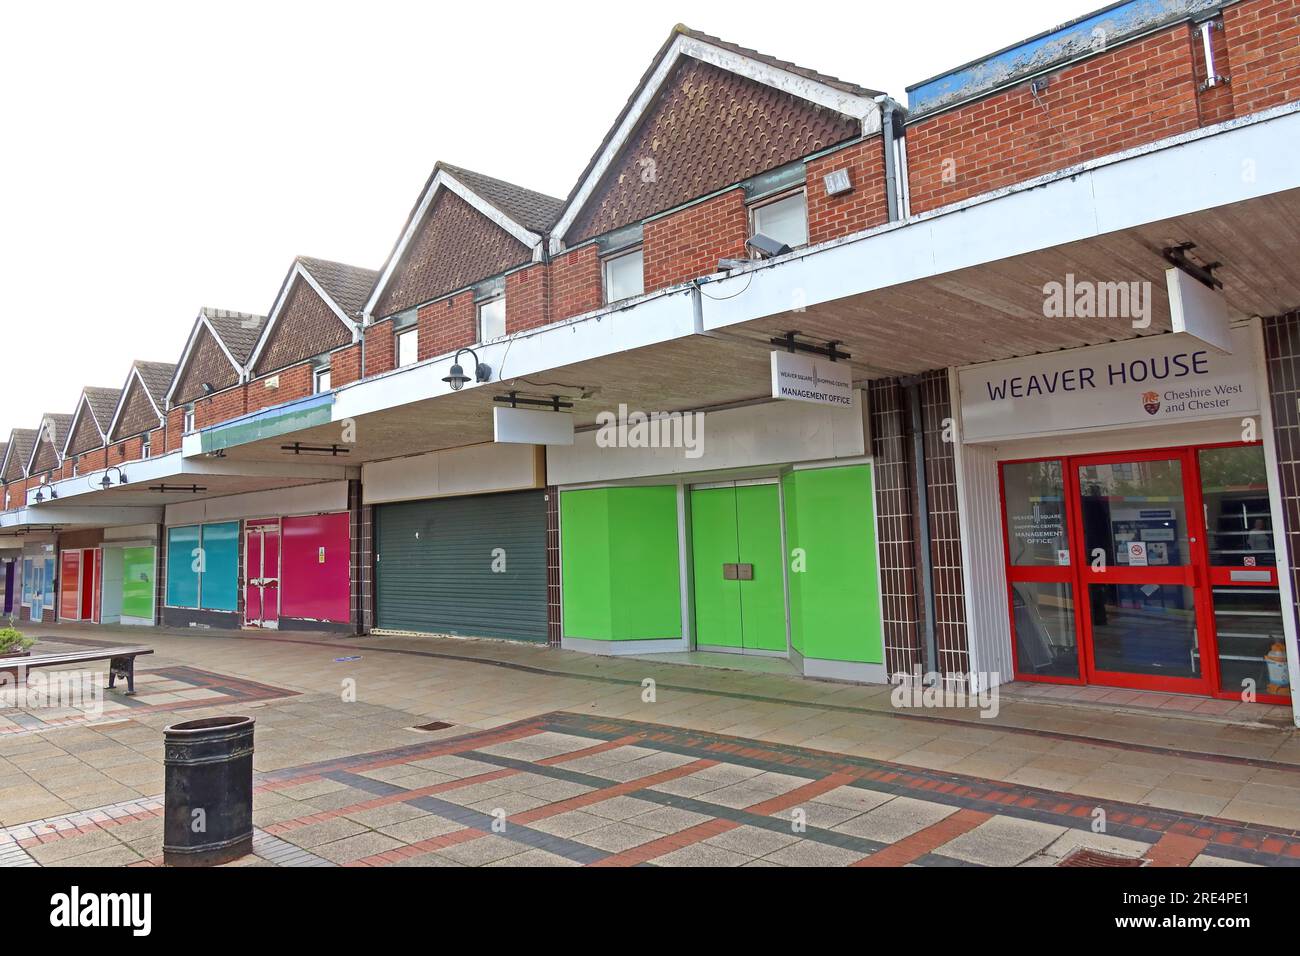 CWAC Weaver House Shuttered, closed and boarding Shops im Weaver Square Shopping Centre, 35-37, Market St, Northwich, Cheshire, ENGLAND, GROSSBRITANNIEN, CW9 5AY Stockfoto